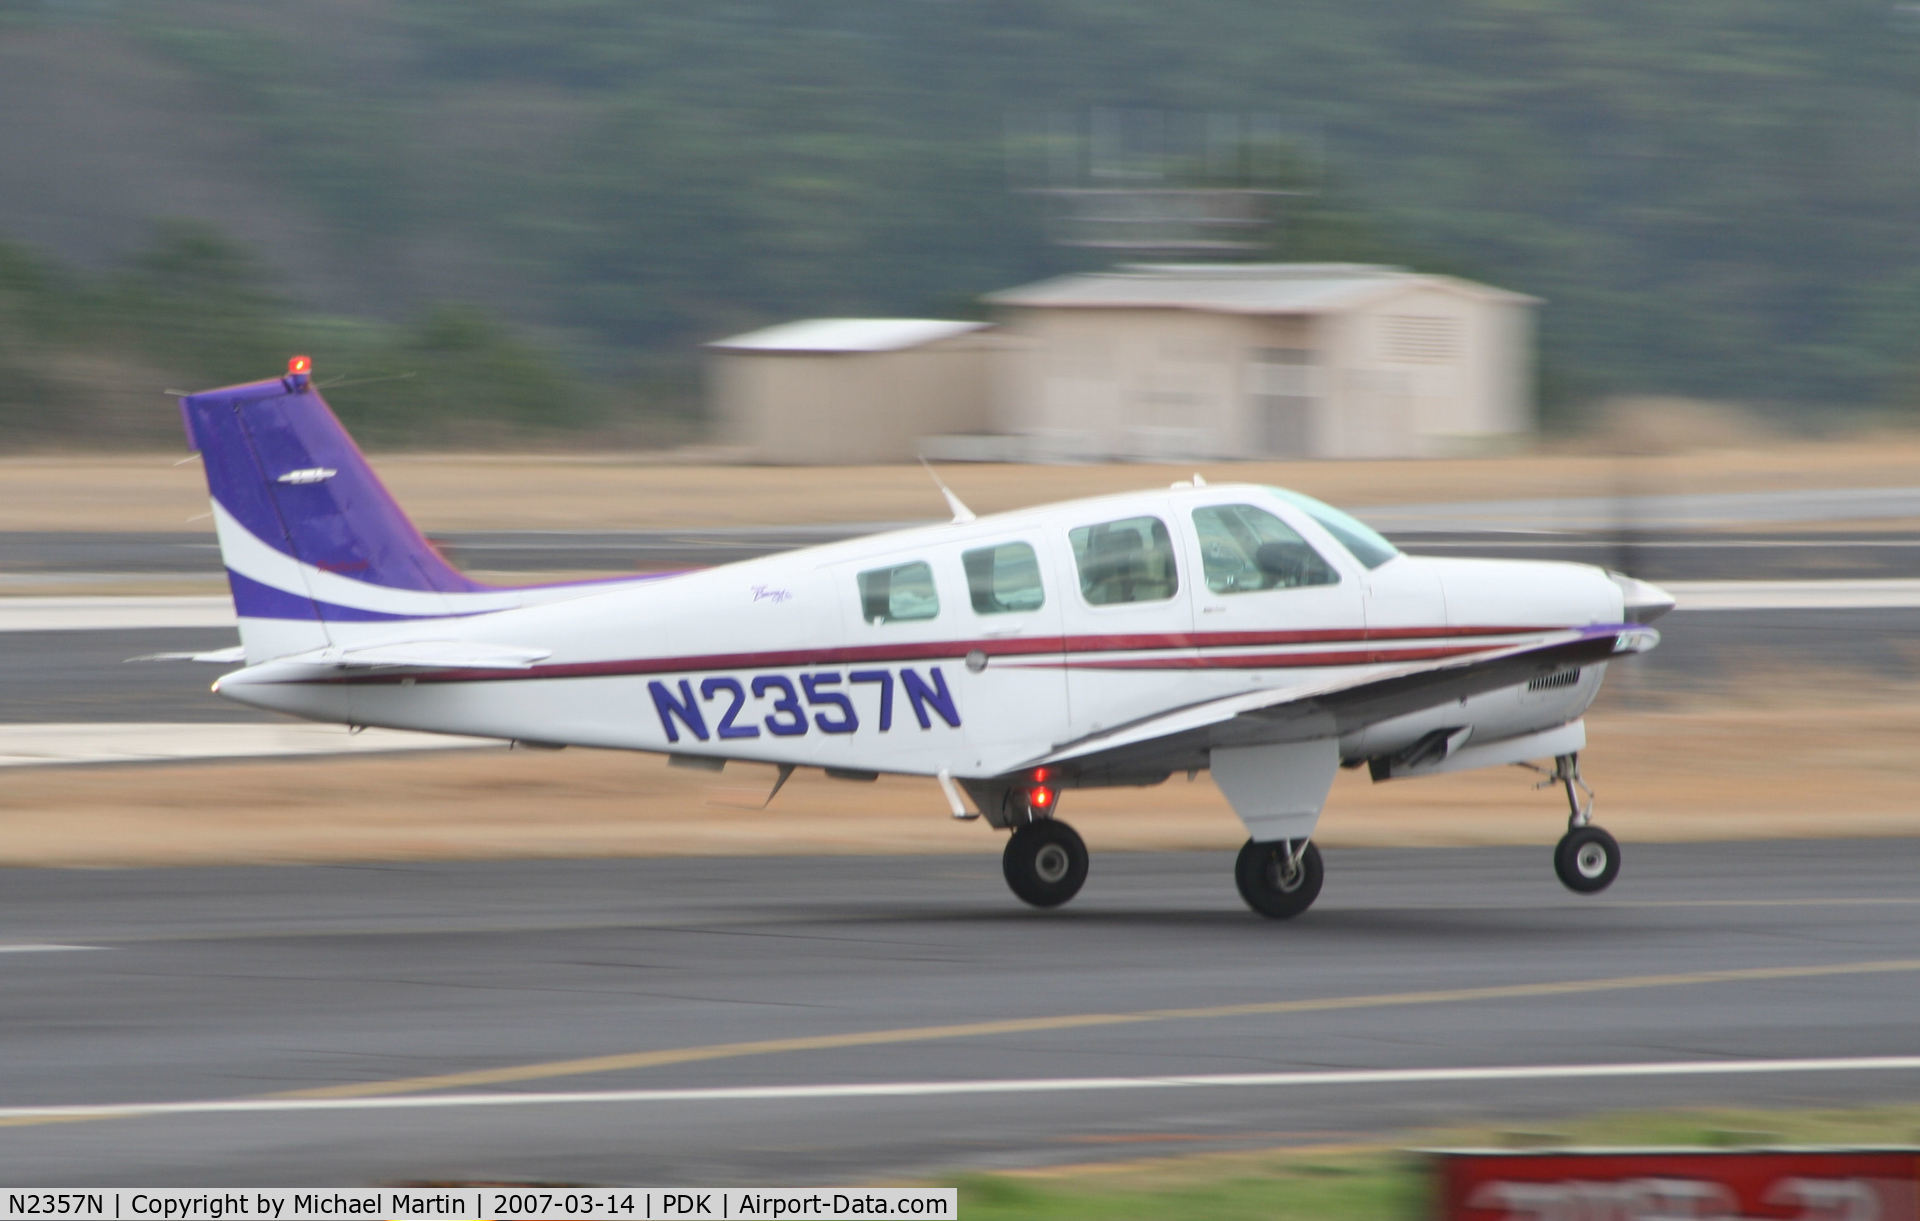 N2357N, 1998 Raytheon Aircraft Company A36 Bonanza C/N E-3157, Departing PDK enroute to parts unknown!